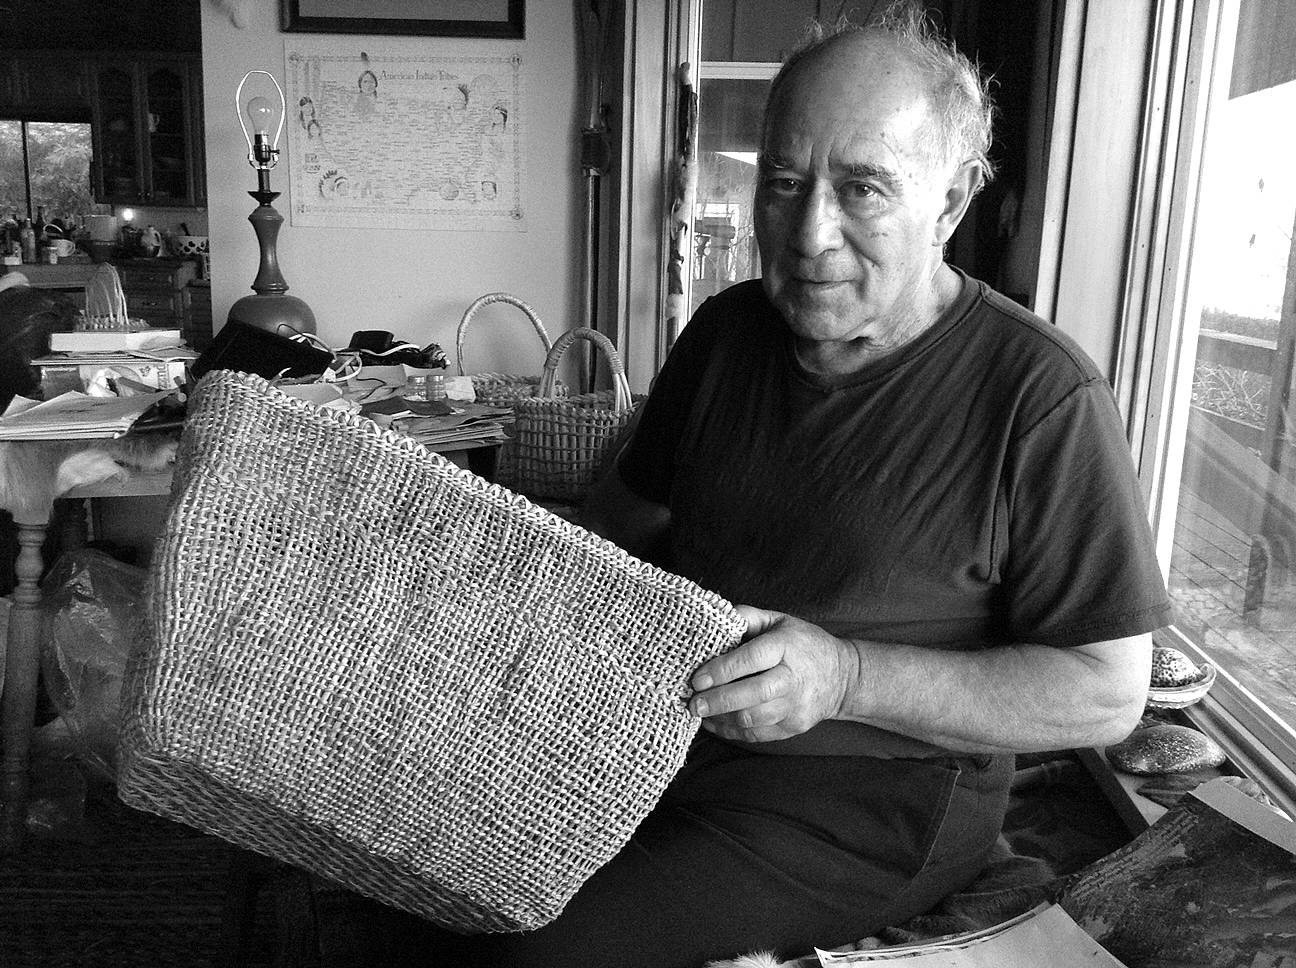 Photo courtesy of Marcy Lynn                                Suquamish elder Ed Carriere is a master basket weaver specializing in the creation of ancient Salish Sea-type basketry. He will visit the new Bainbridge Artisans Resource Network (8890 Three Tree Lane) at 6:30 p.m. June 9 to share his work.